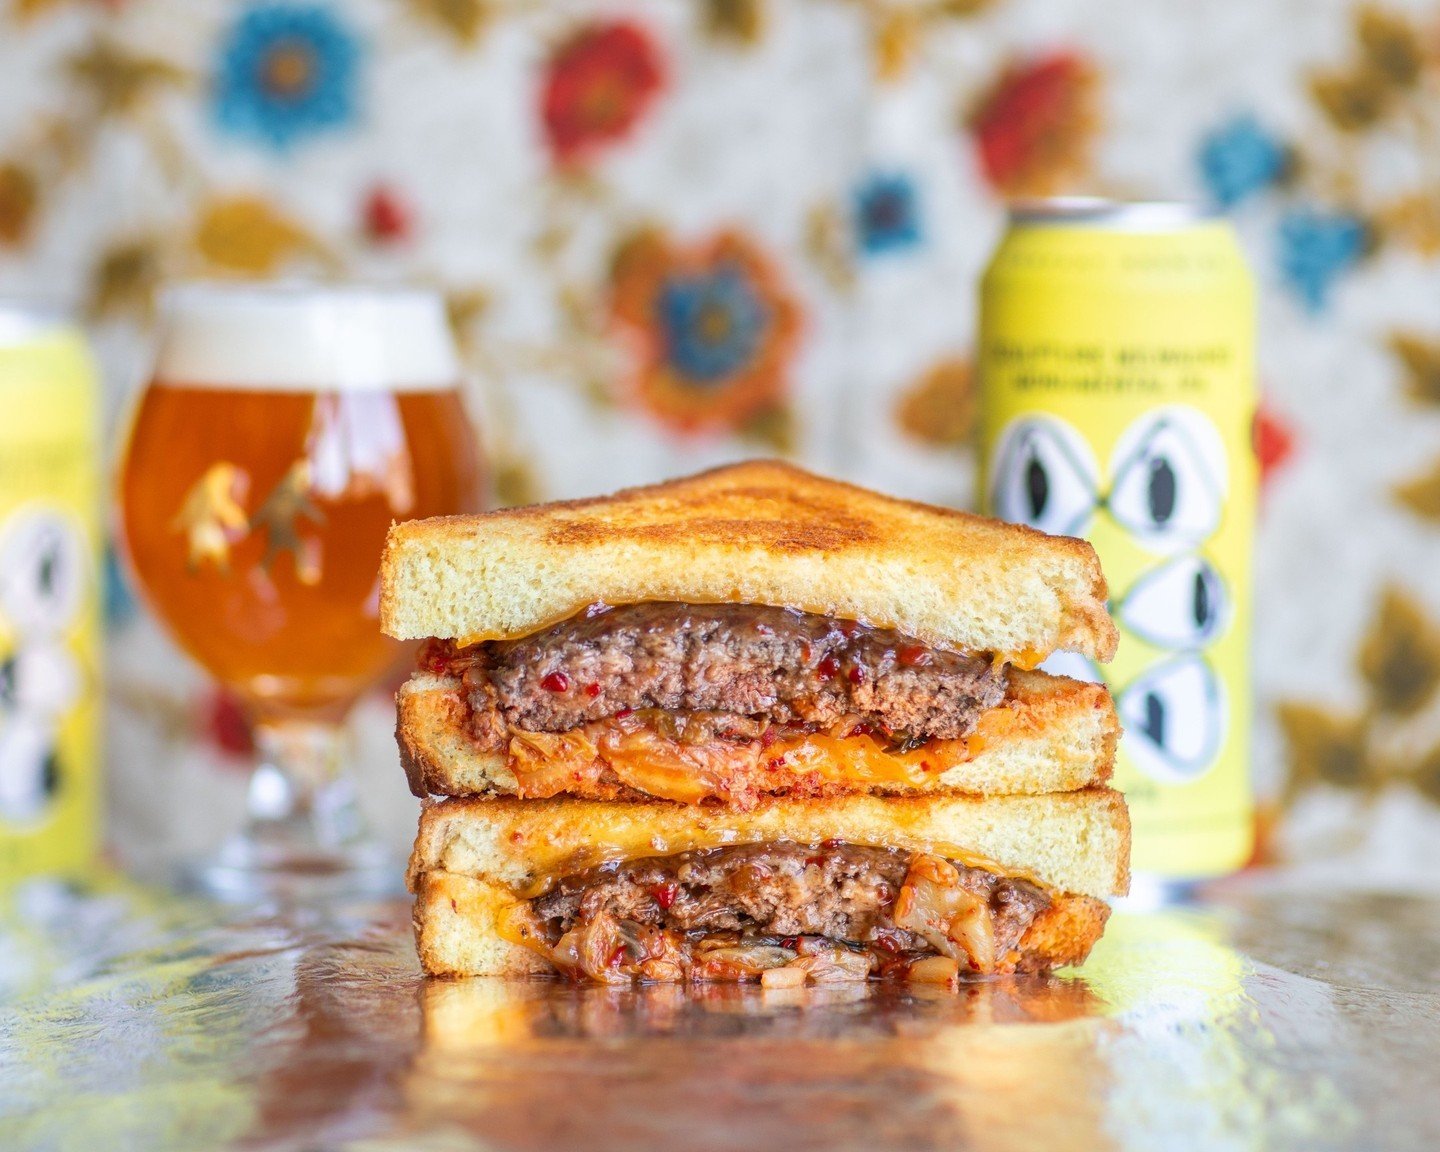 THERE'S A NEW BURGER OF THE WEEK!⁠
⁠
THE PATIO IS OPEN!⁠
⁠
The Kimcheese Burger - A burger with Kimchi, Cheddar Cheese, Sweet Chili, 6 oz Hand Rolled Beef Patty, all on Texas Toast.⁠
⁠
Drink a Sculpture Milwaukee Monumental Double IPA with it.